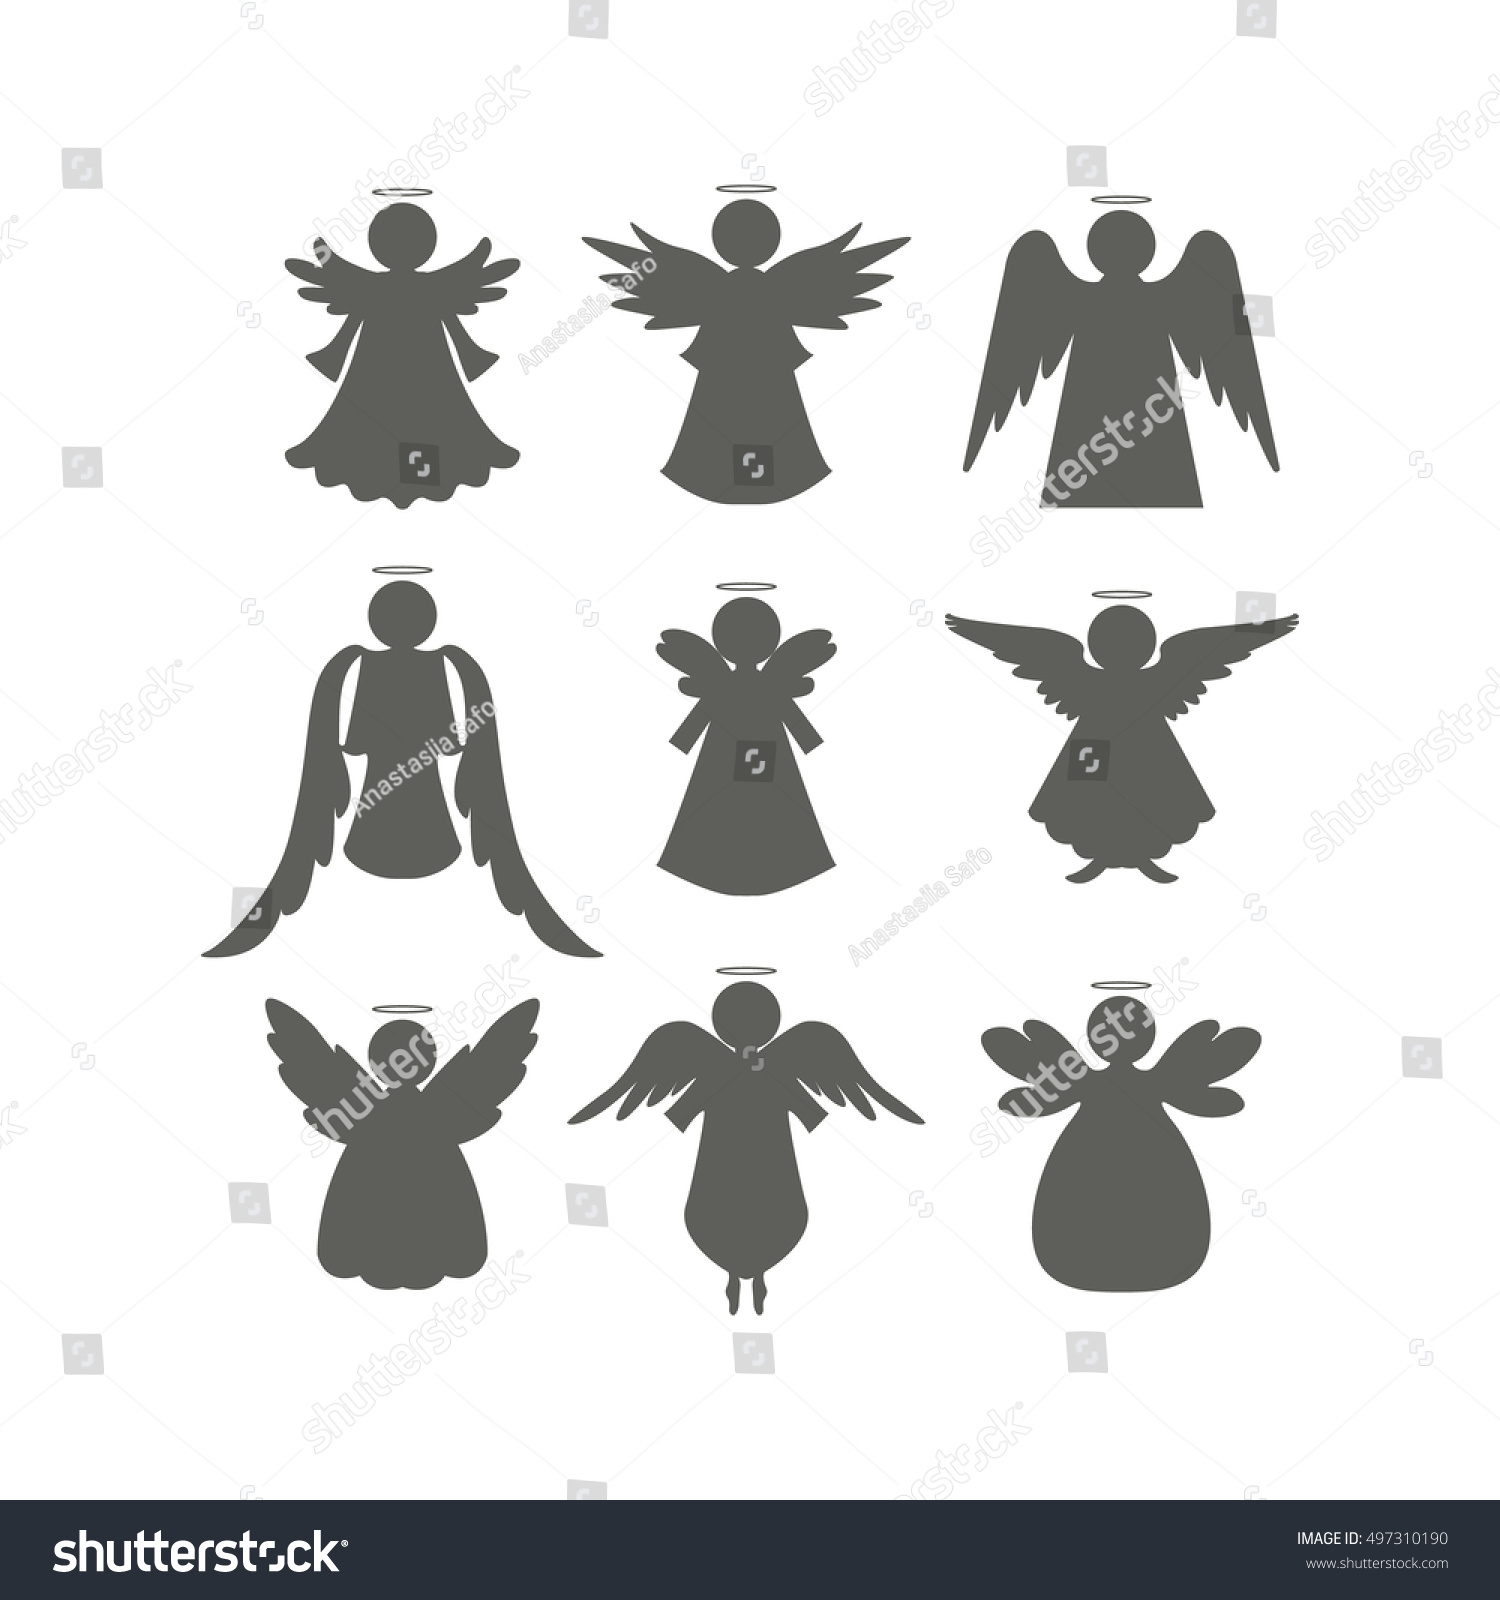 Angels Collection Vector Silhouette Stock Vector (Royalty Free) 497310190